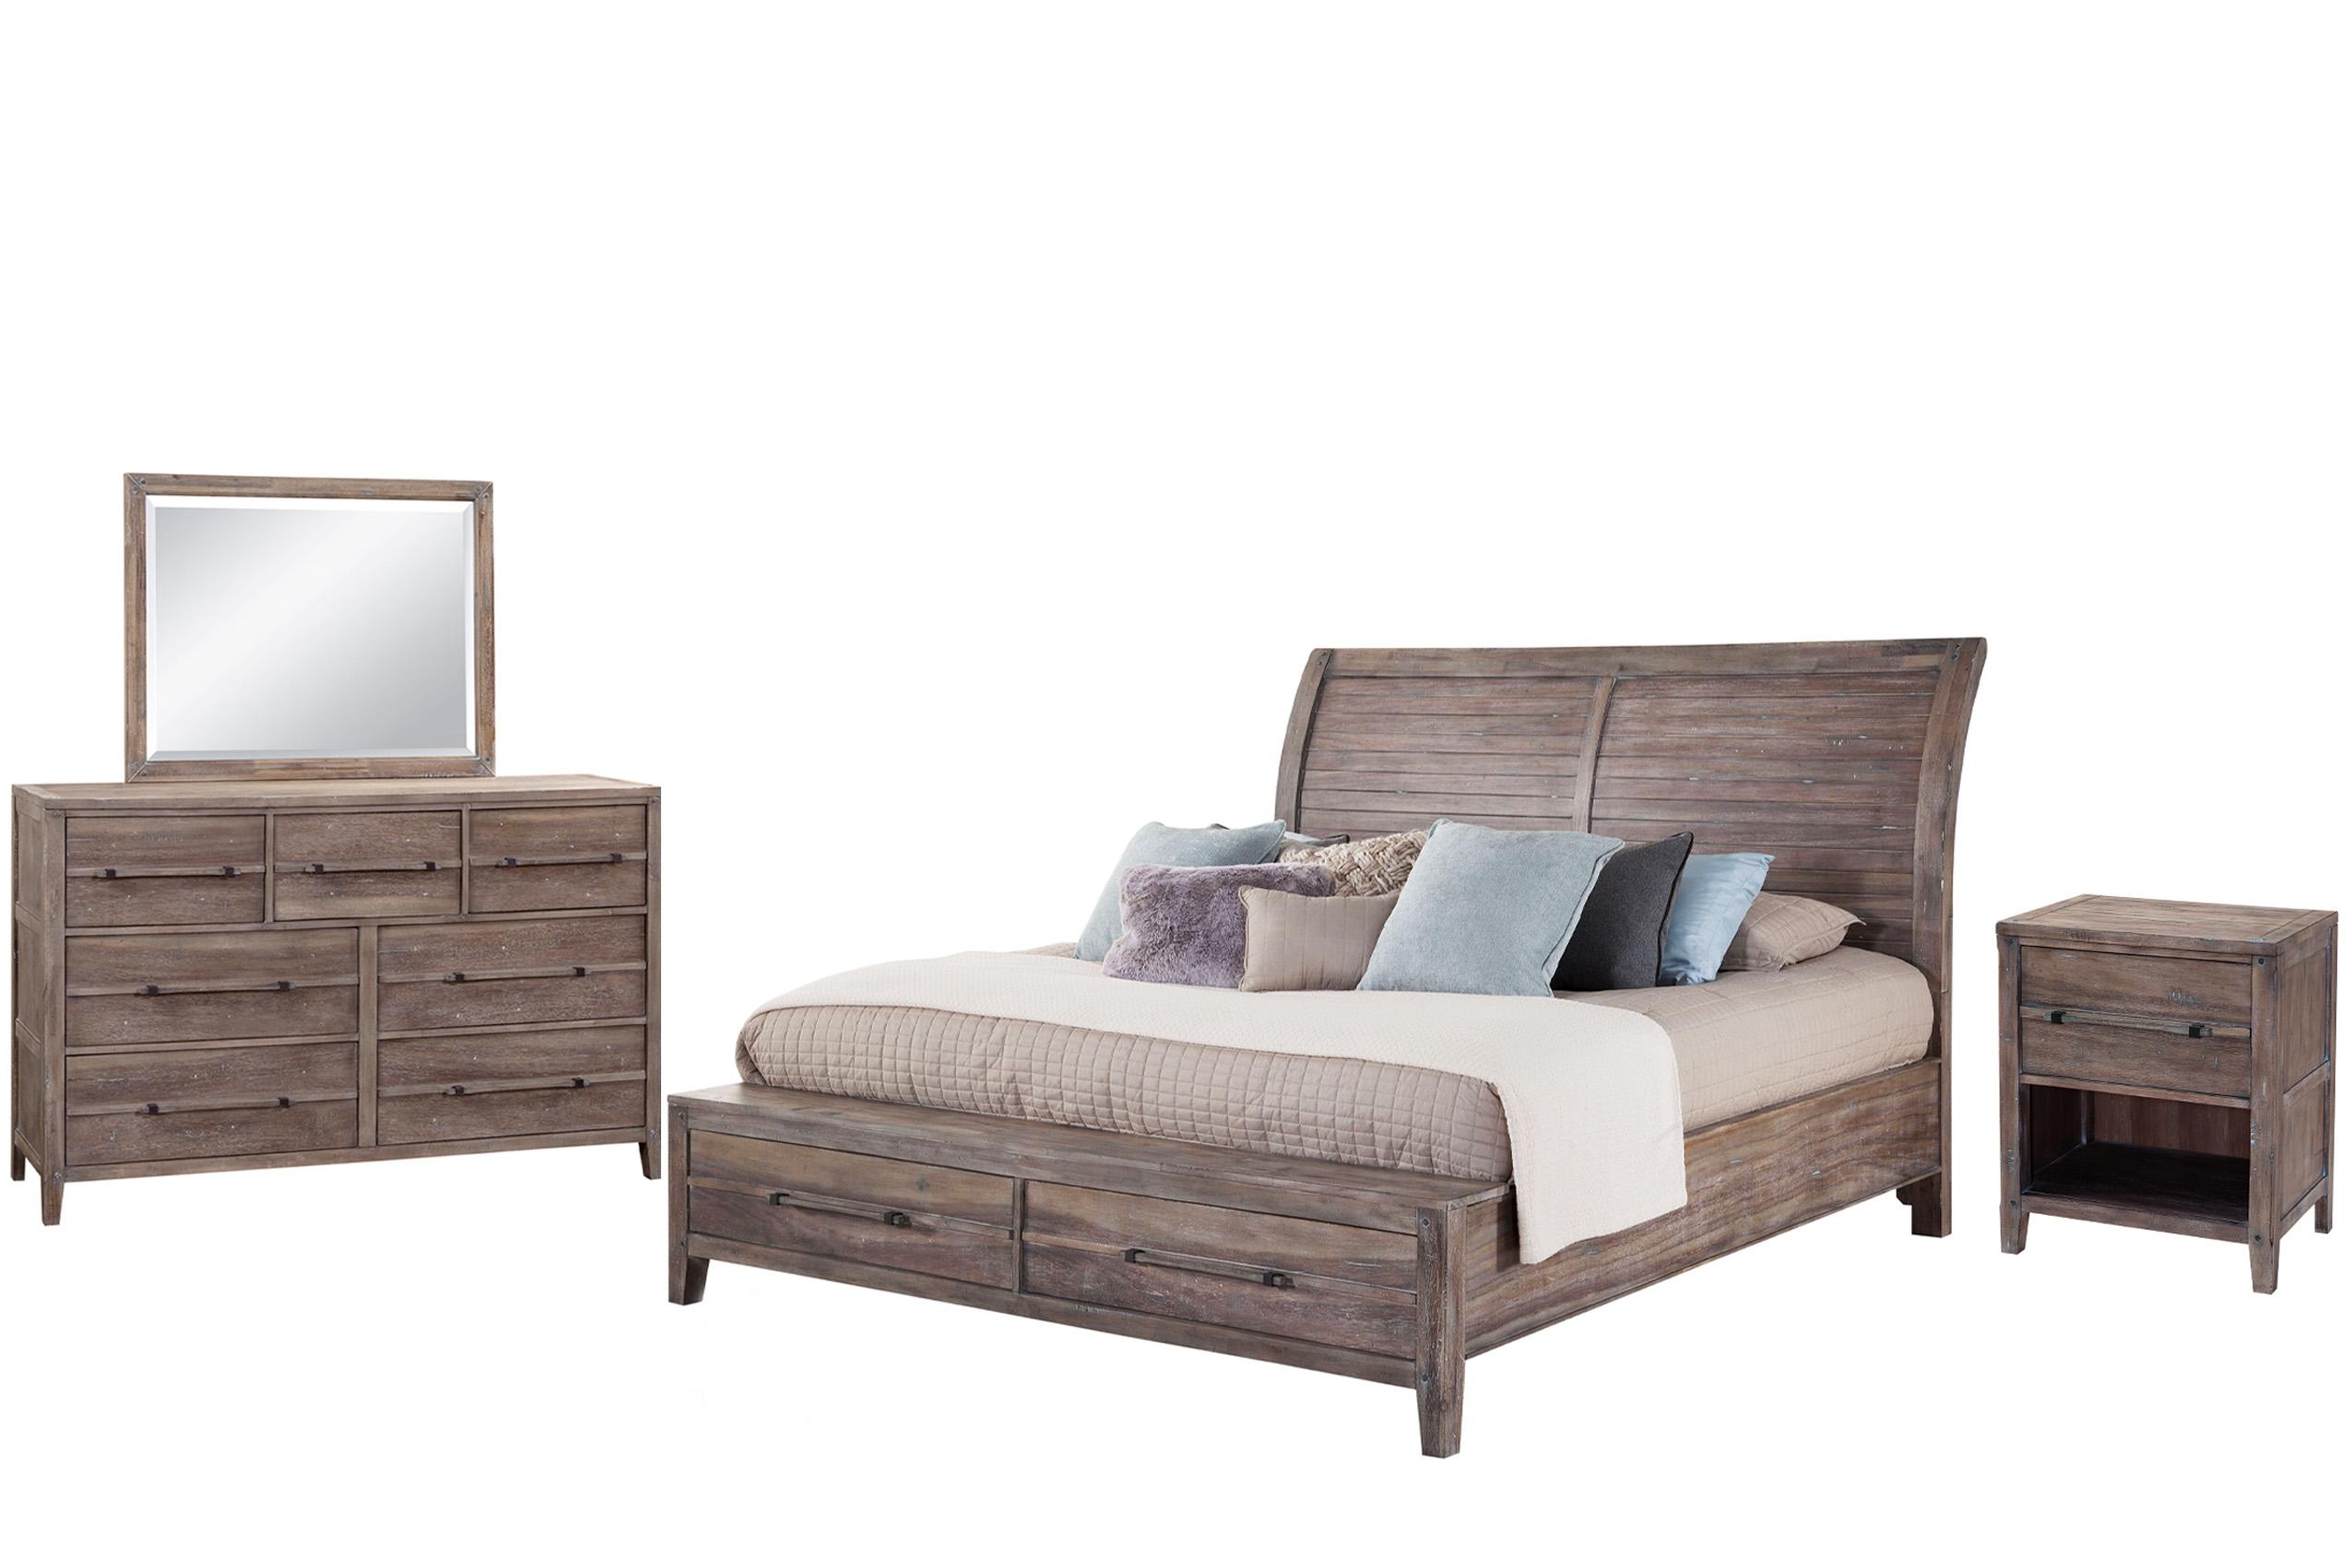 Classic, Traditional Sleigh Bedroom Set AURORA 2800-50SLES 2800-QSLST-4PC in Driftwood, Gray 